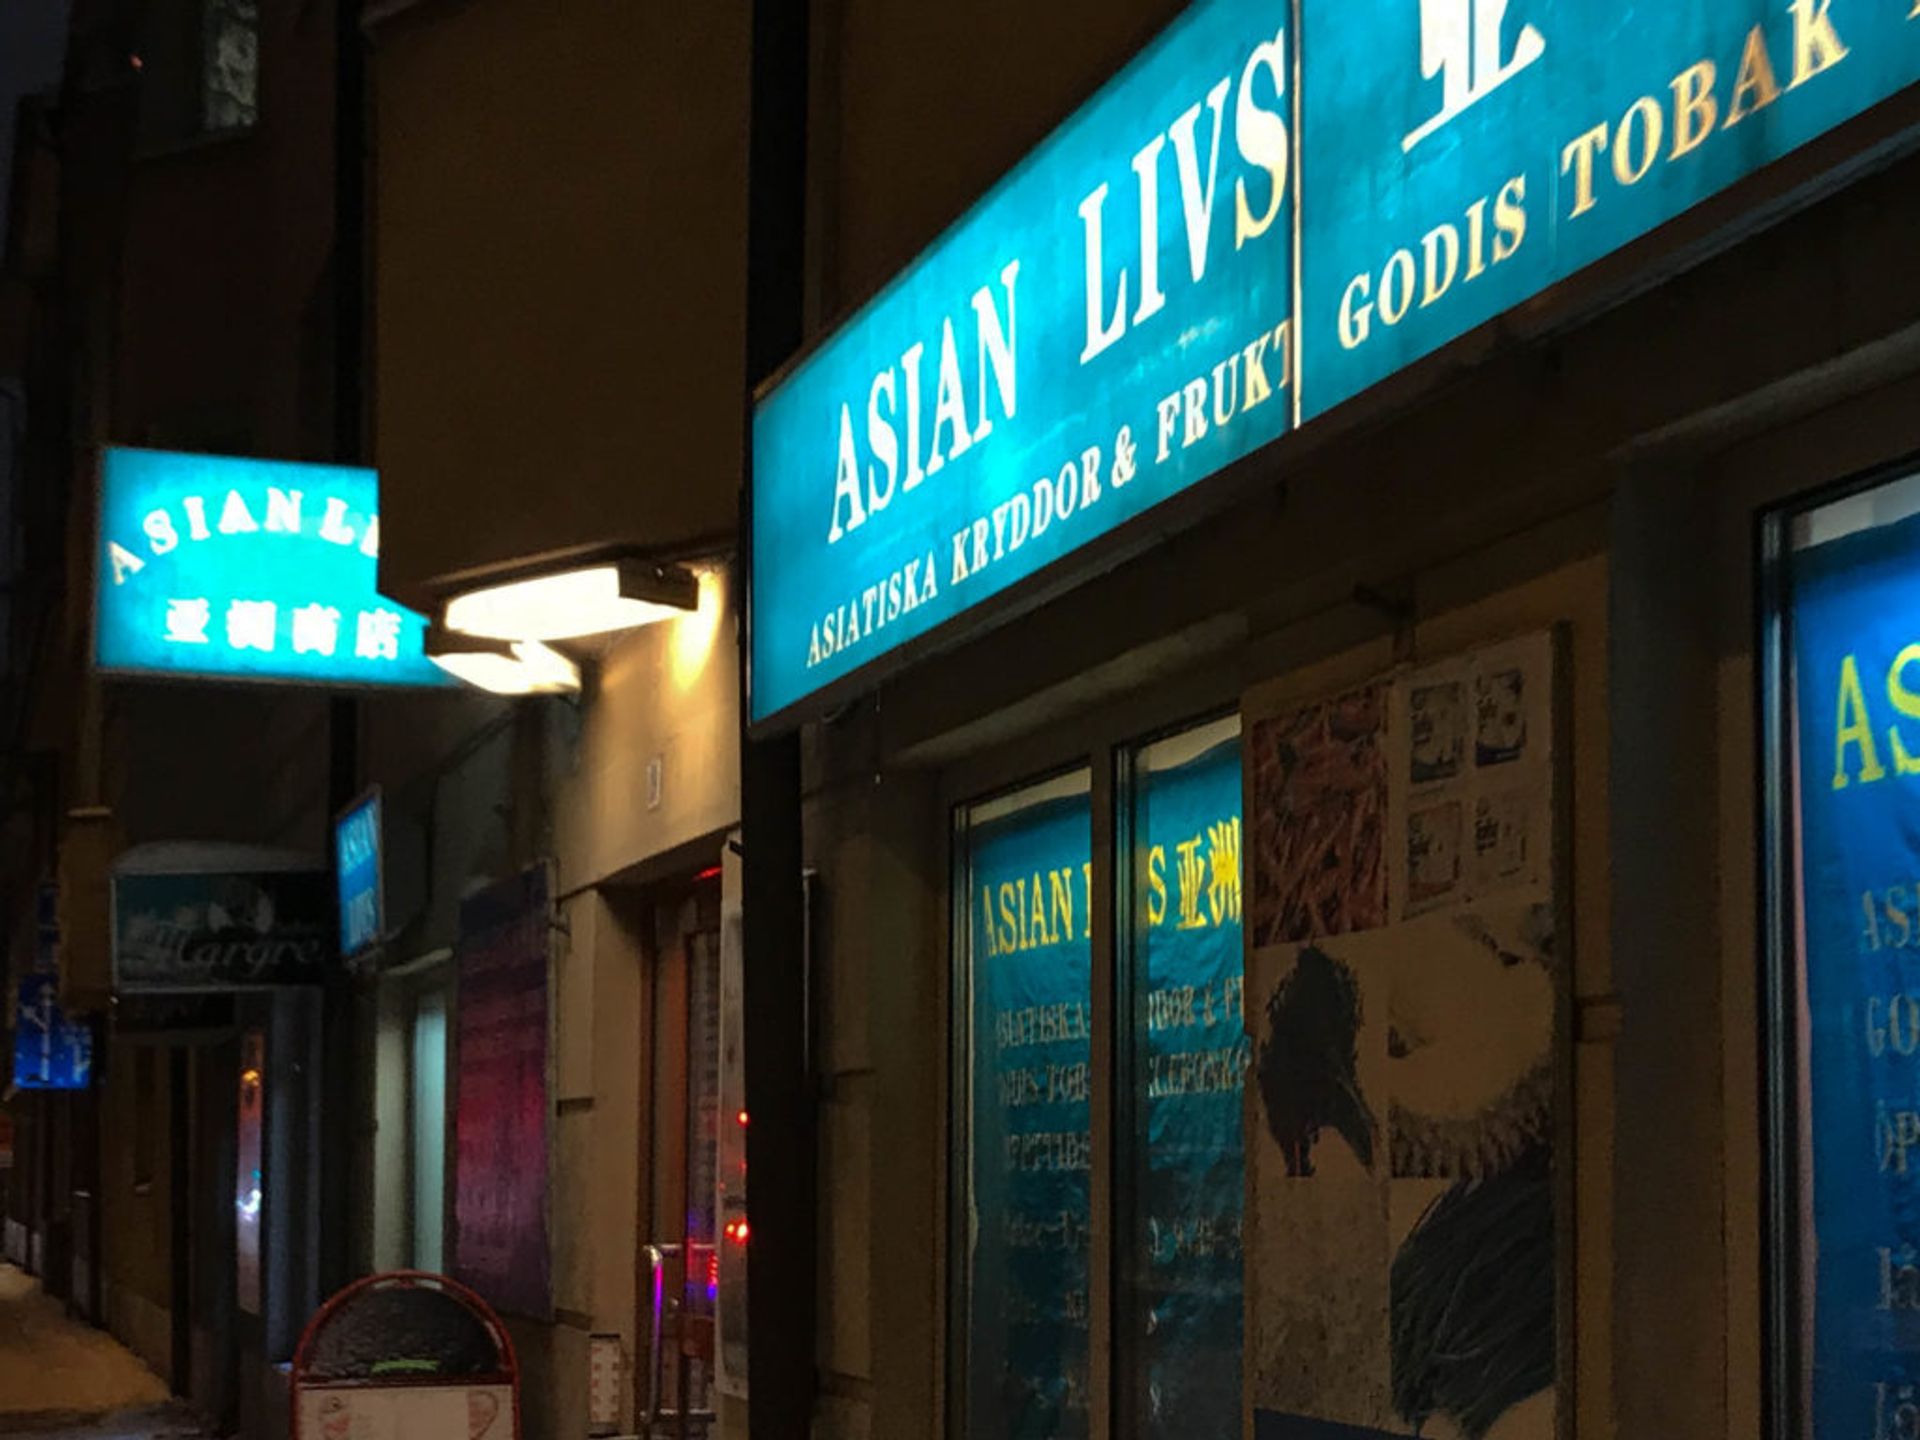 Entrance to the Asian Livs supermarket.